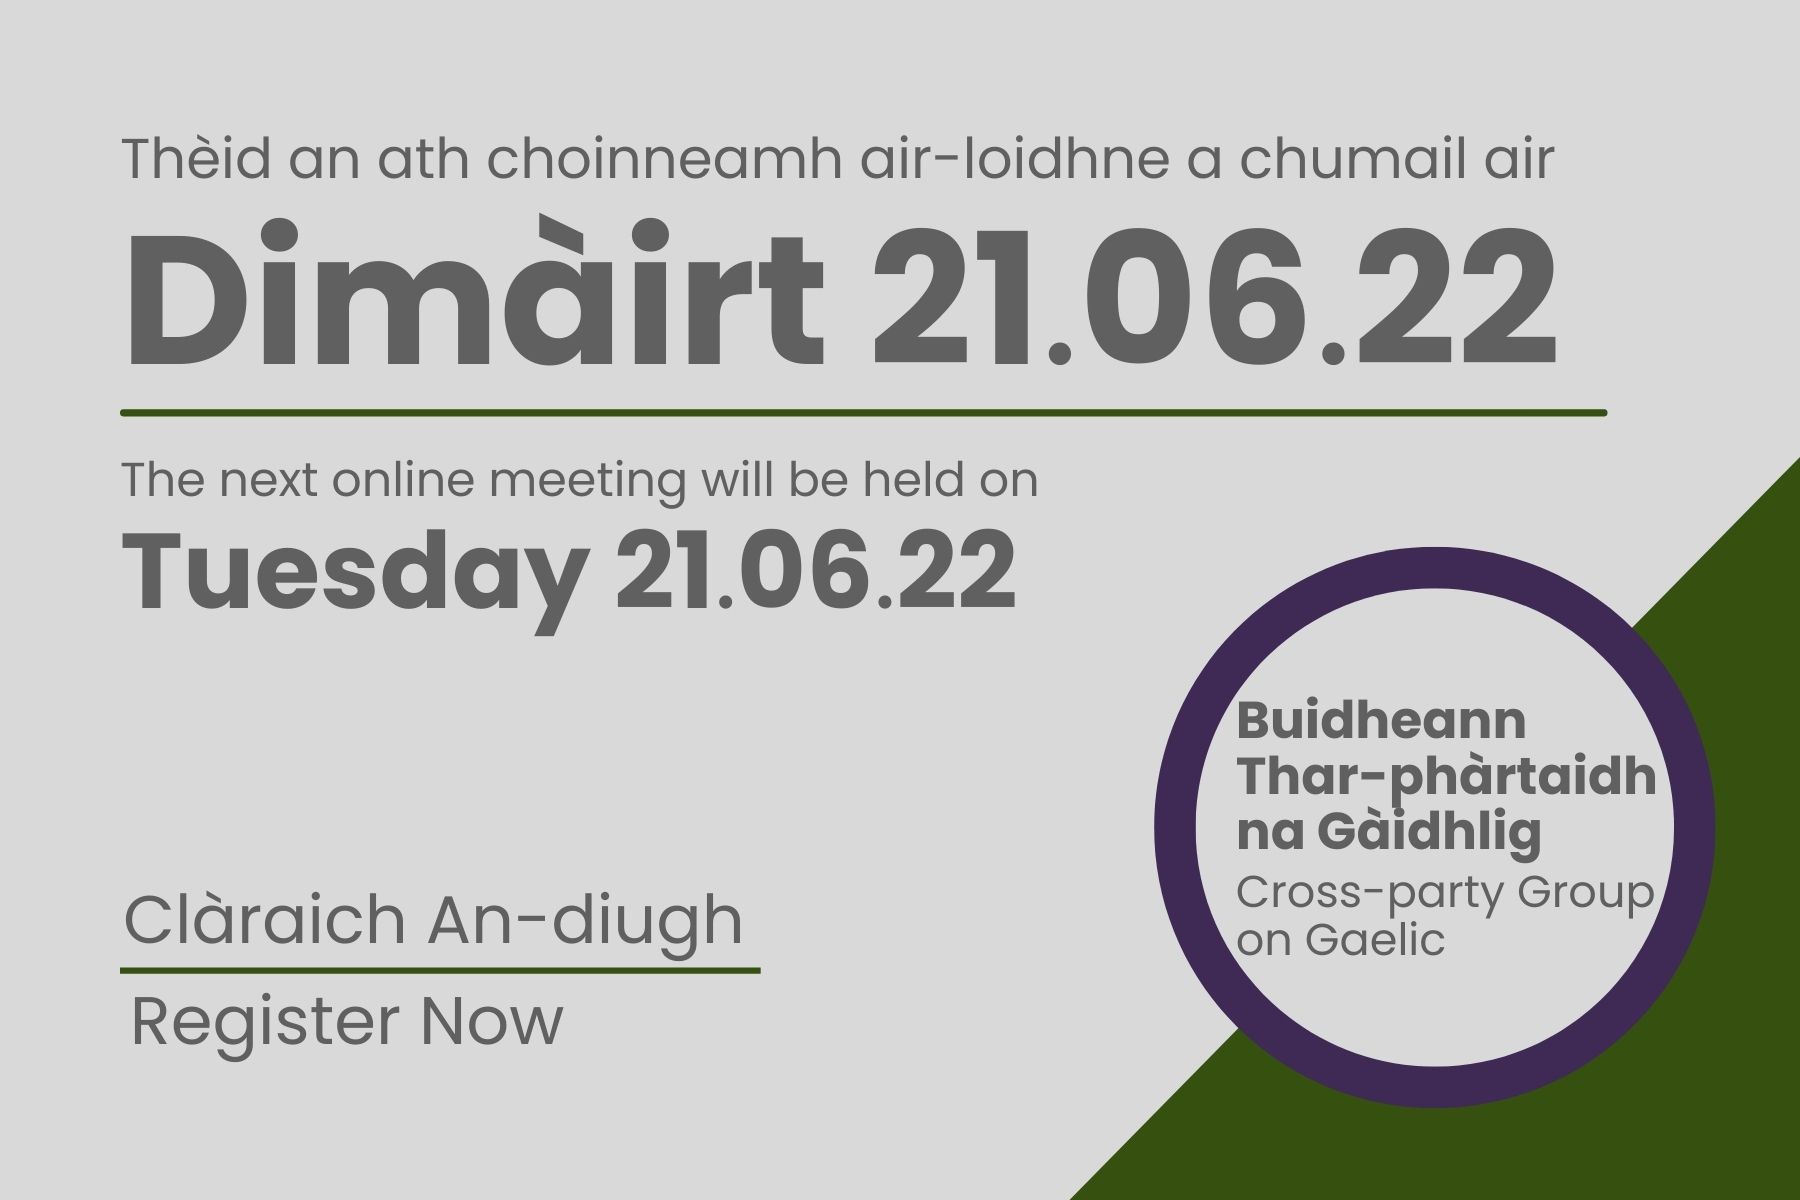 Cross-Party Group on Gaelic